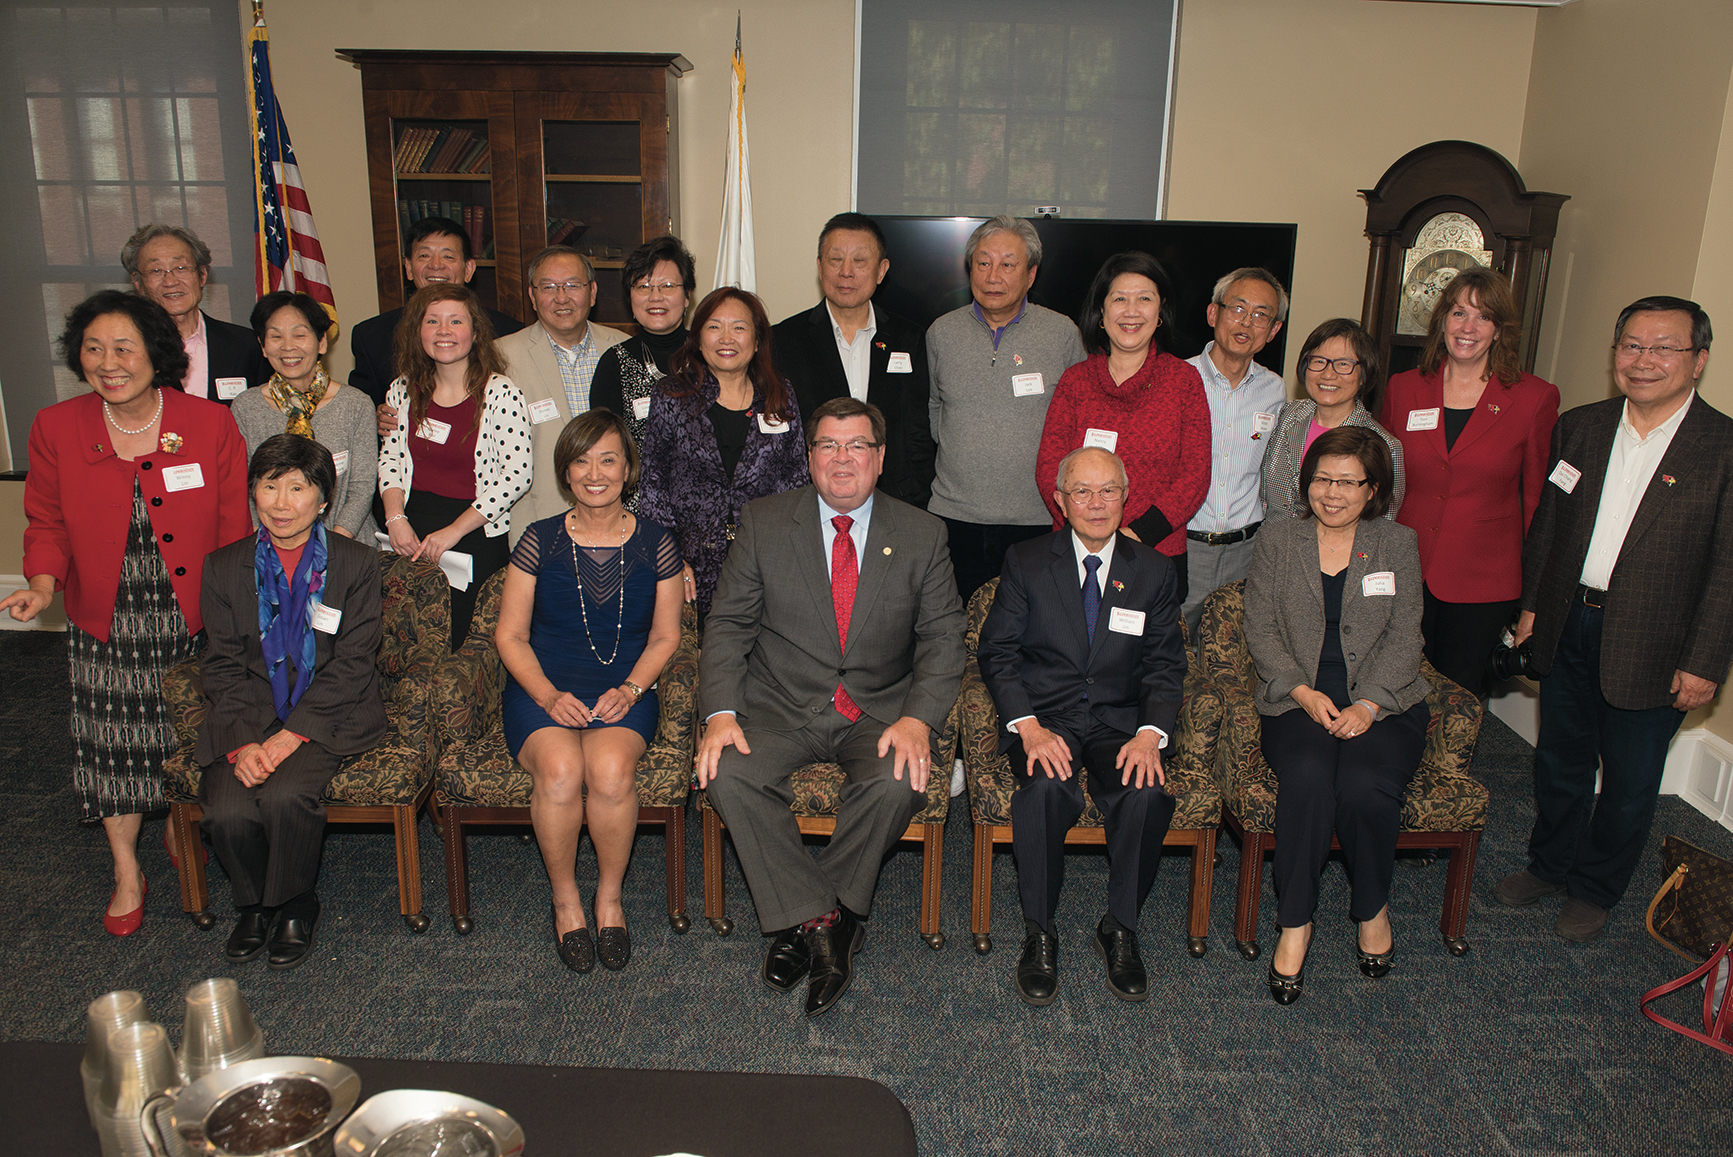 It was a joyful occasion when nearly two dozen alumni from Taiwan had the opportunity to meet with President Larry Dietz last fall. The group posed for a photo with the president in Hovey Hall.